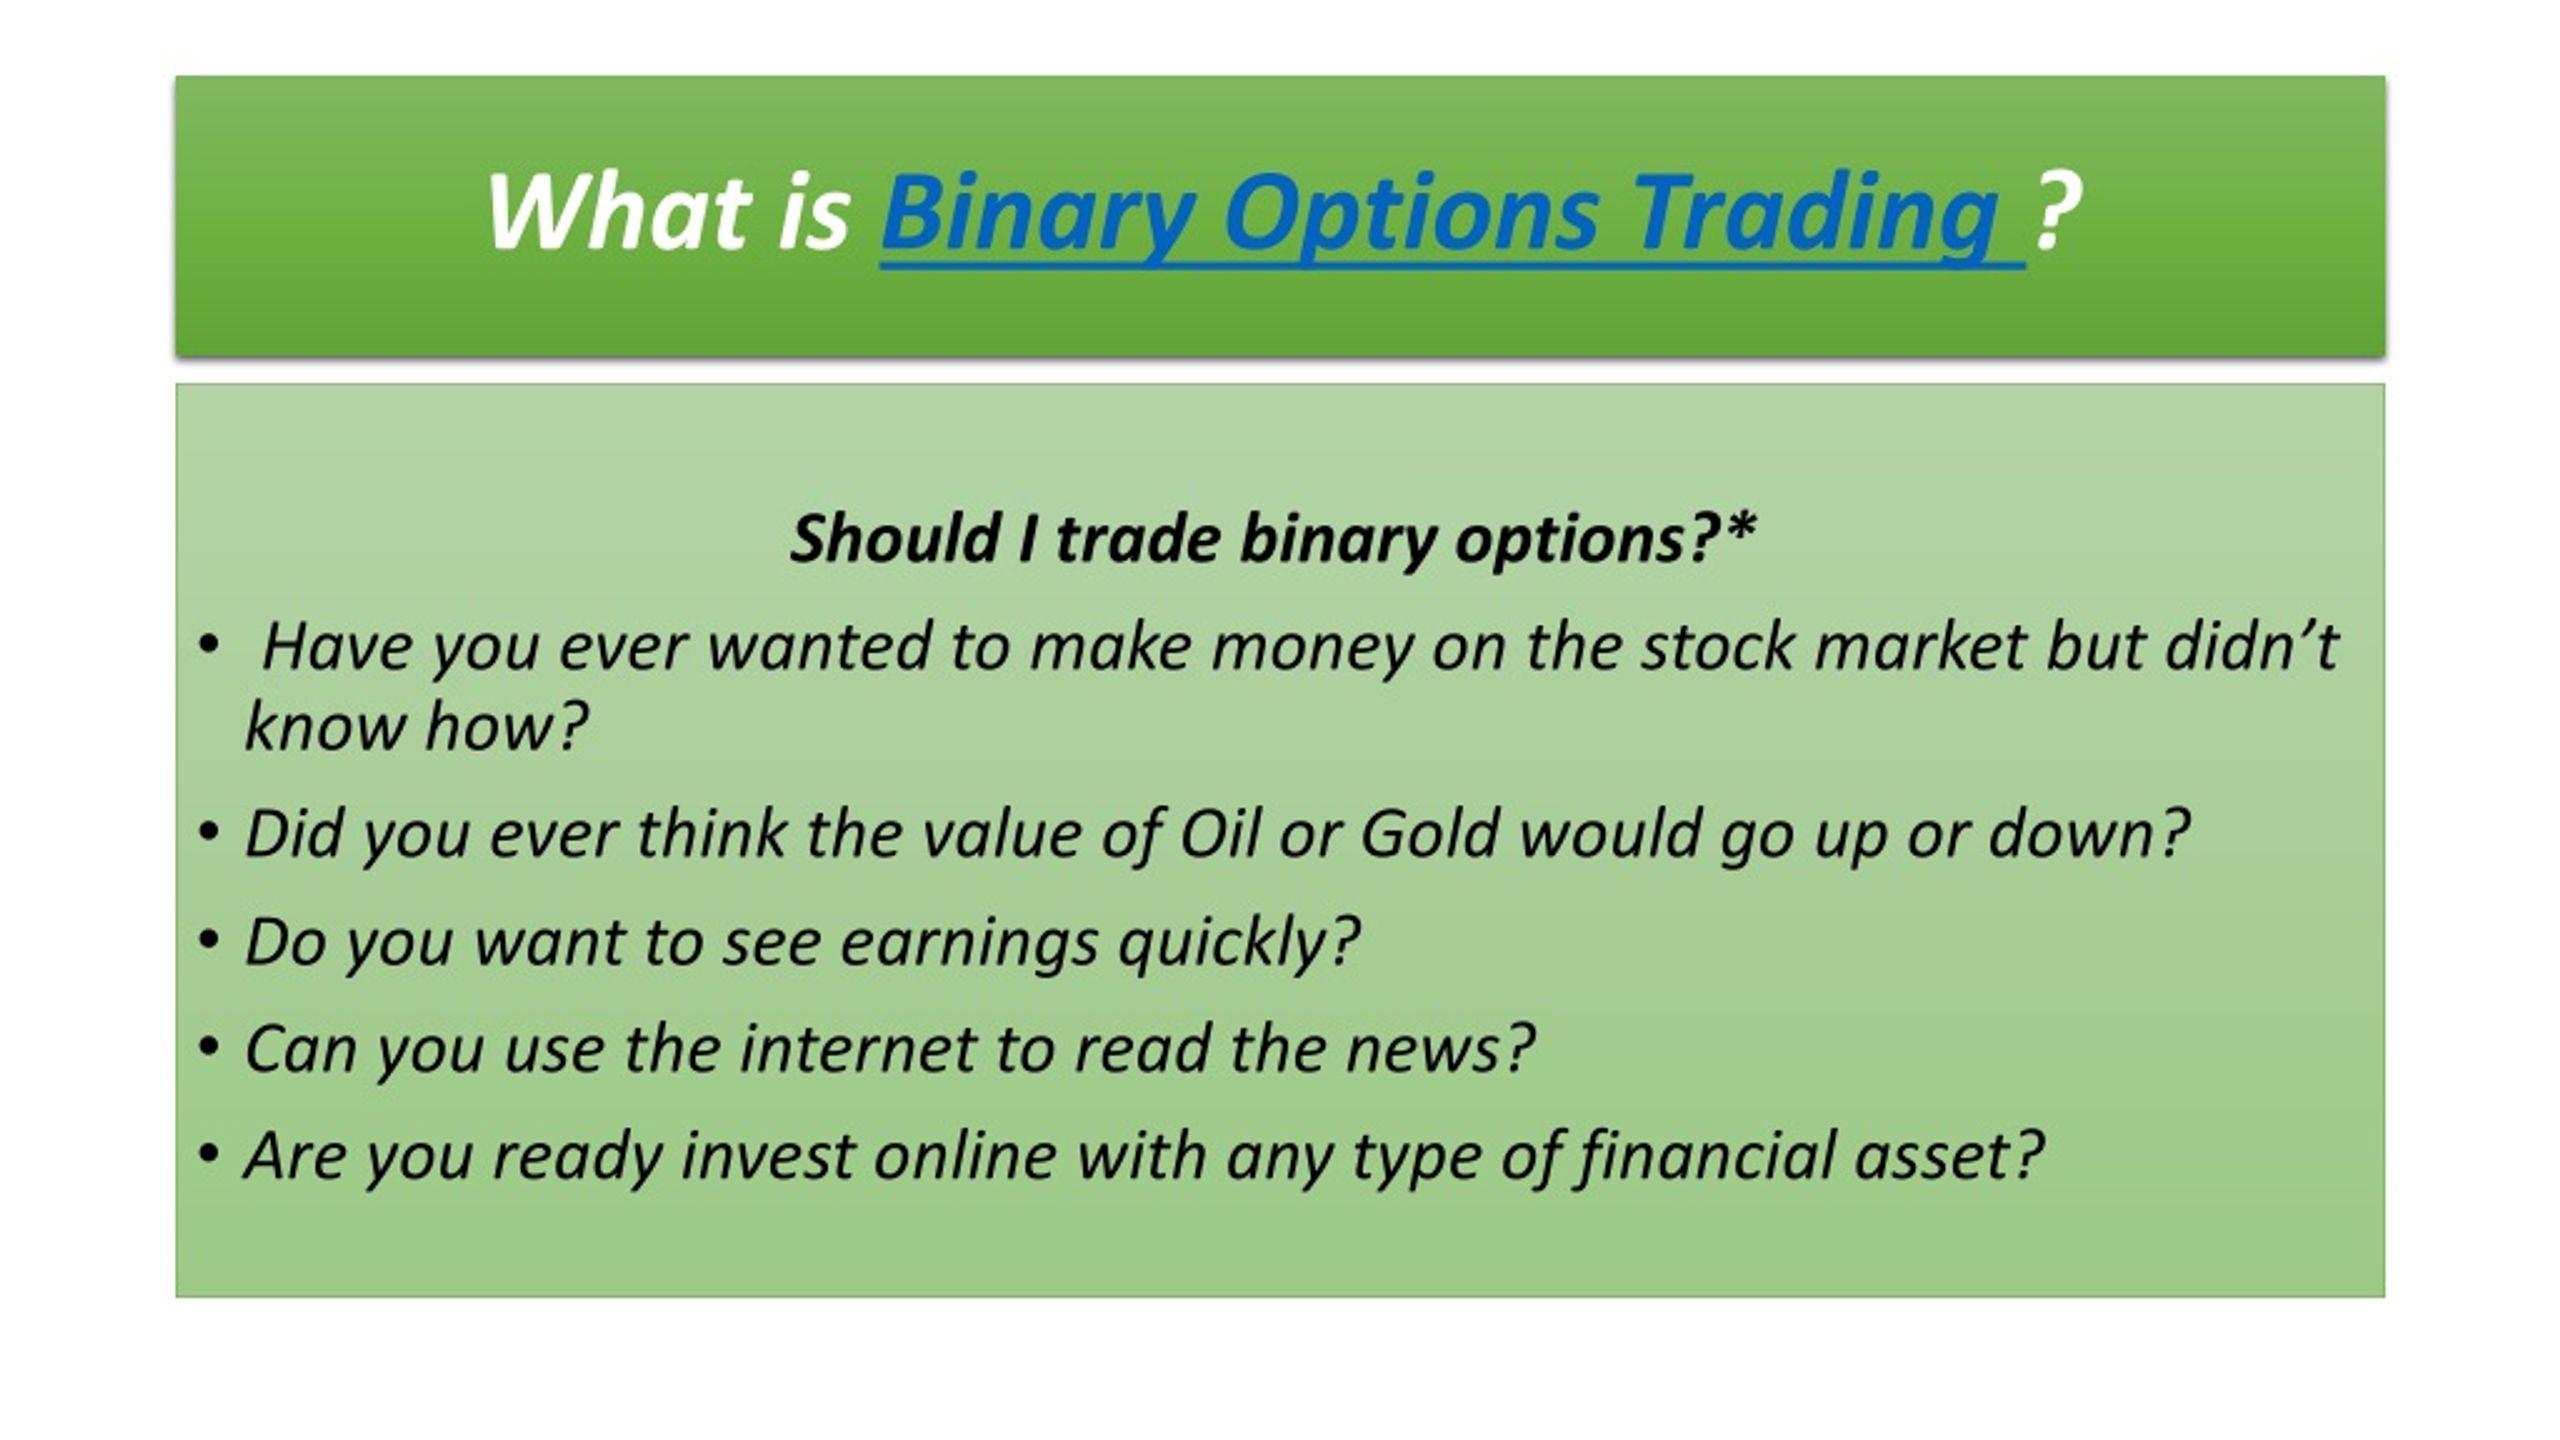 What is binary options trading forex broker review babypips calculator